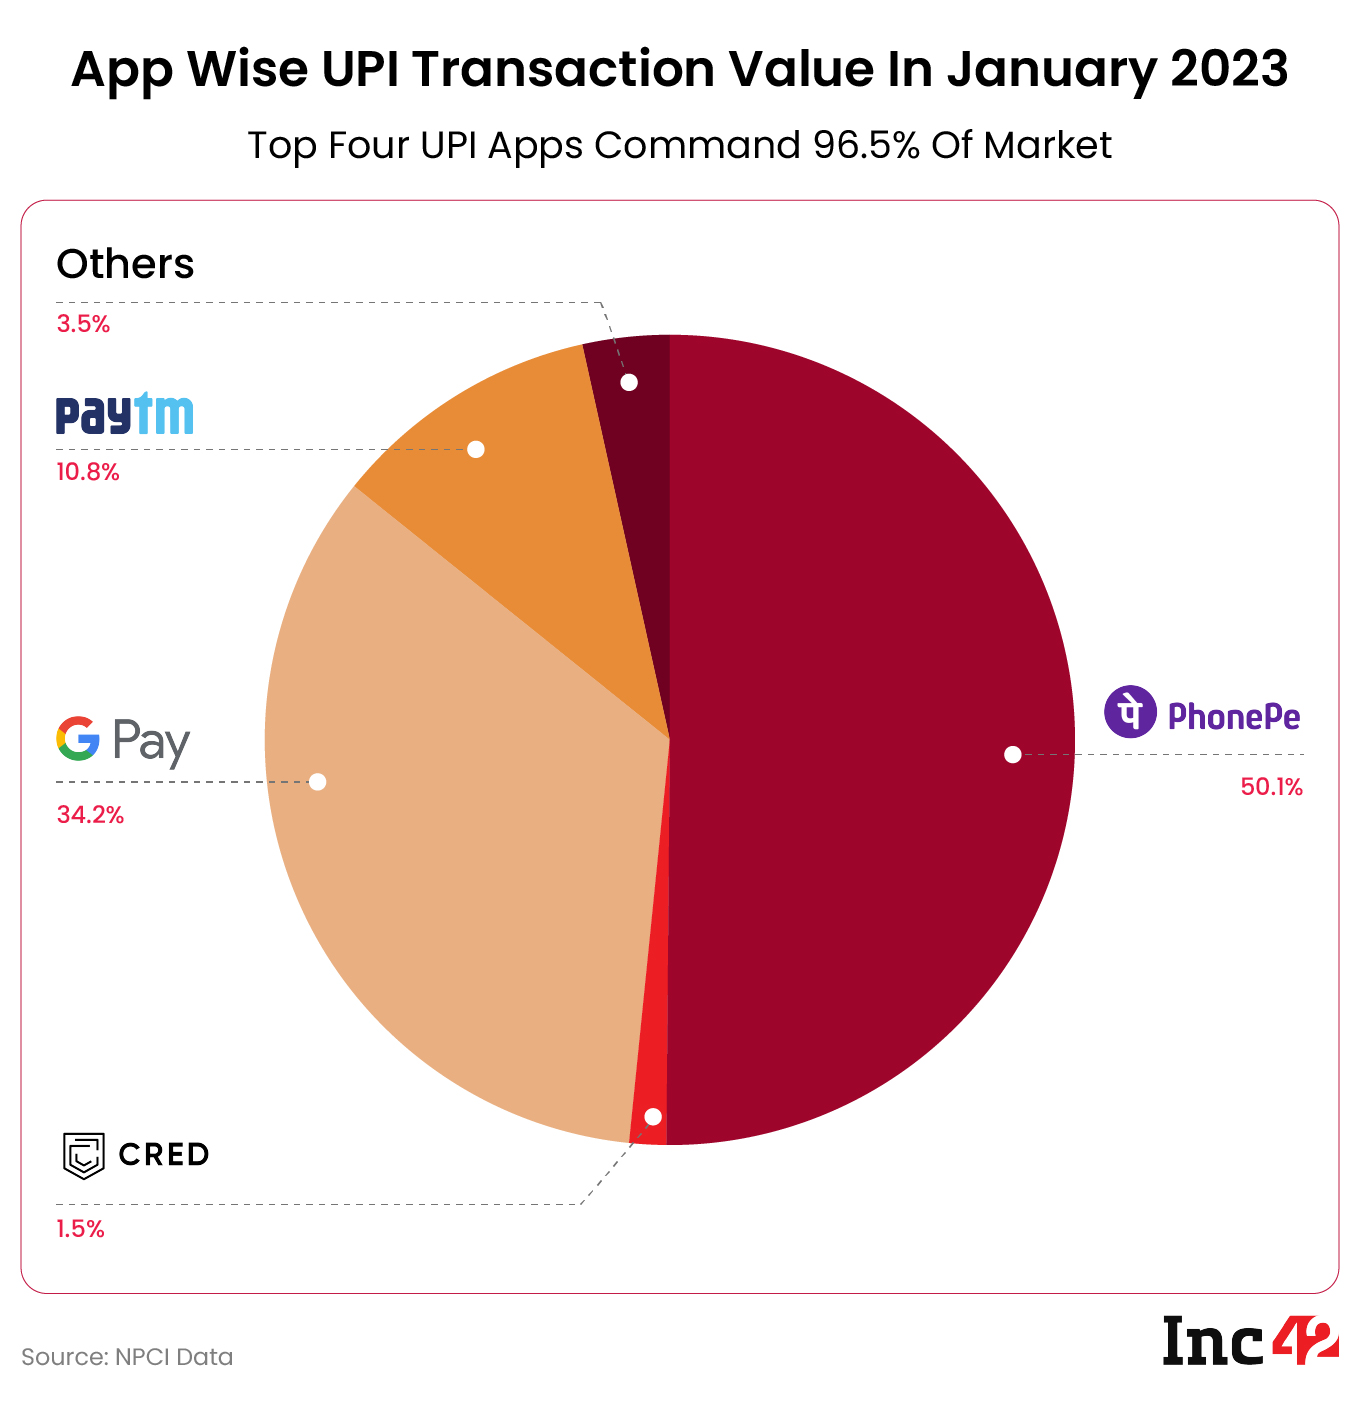 UPI Payments: PhonePe Retains Top Spot In January 2023, Processes